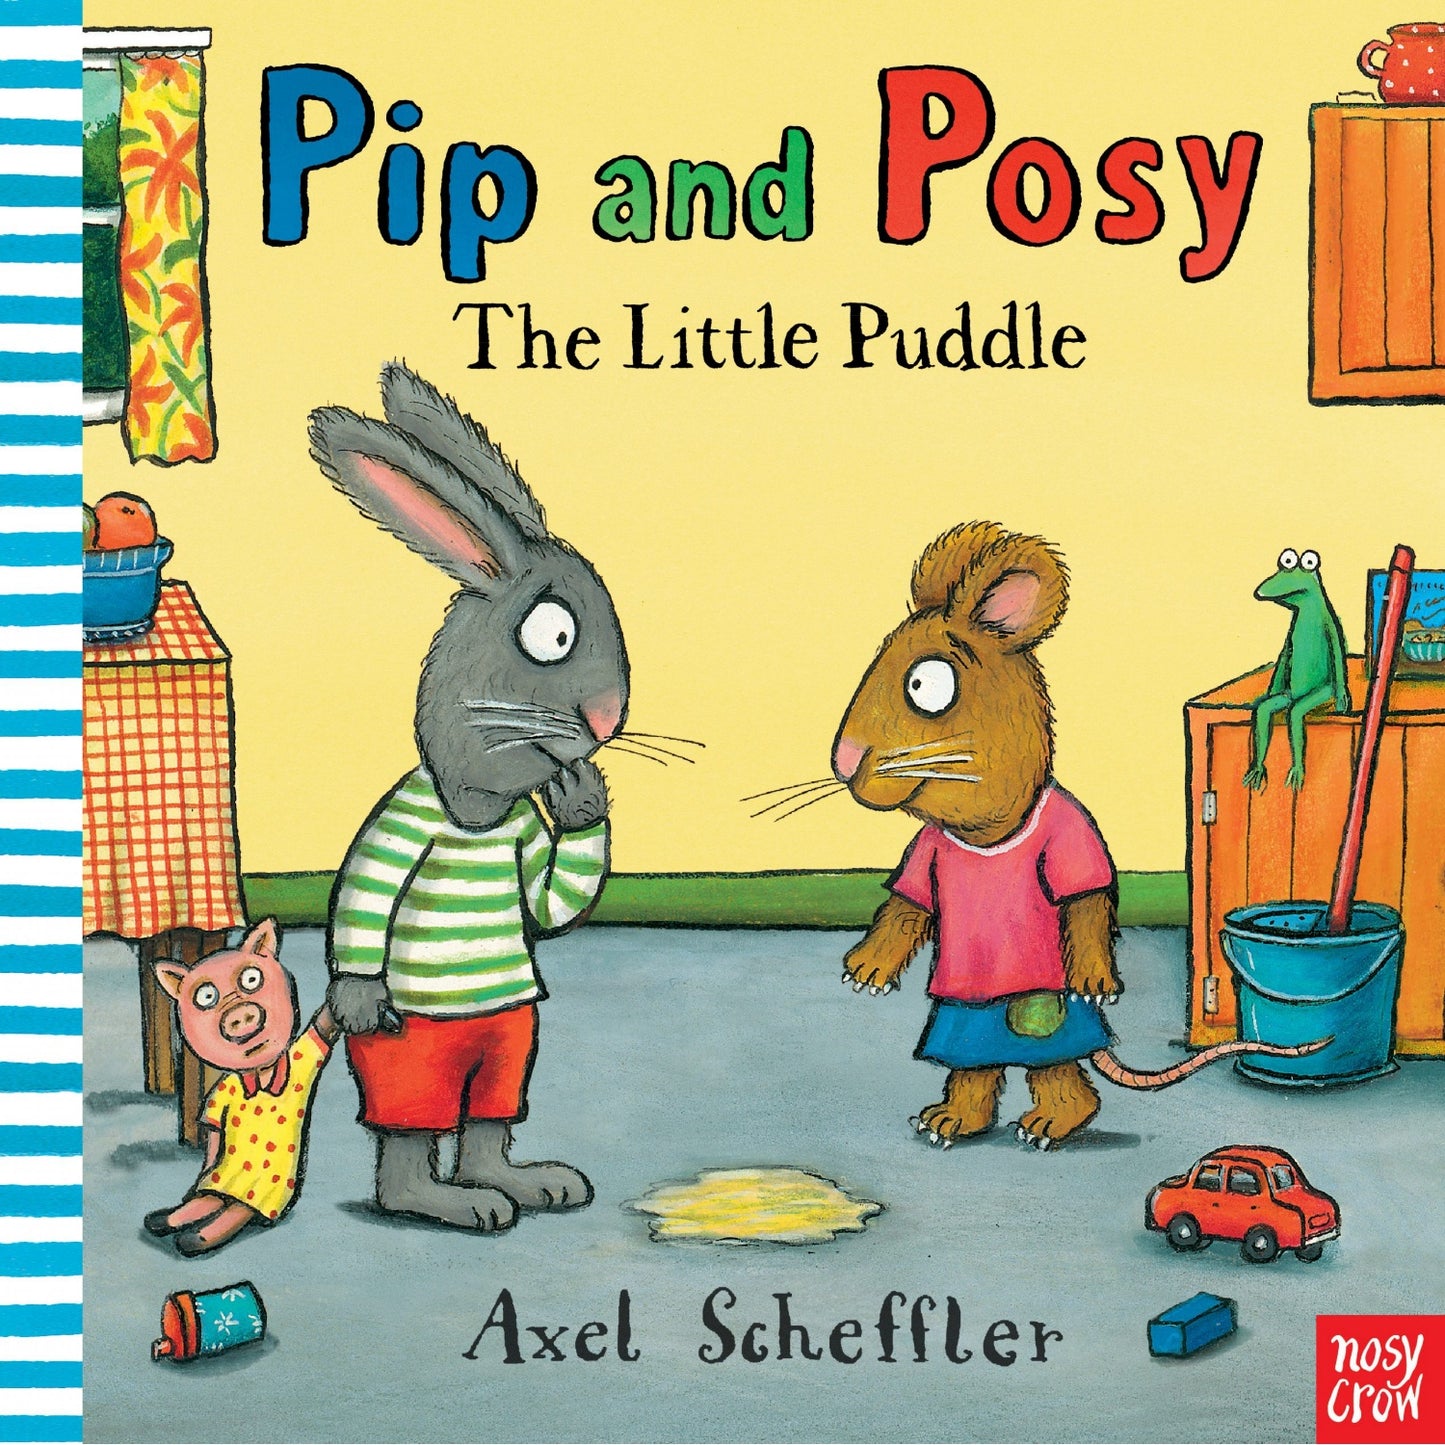 The Little Puddle - Pip & Posy | Paperback | Toddler’s Book on Friendship